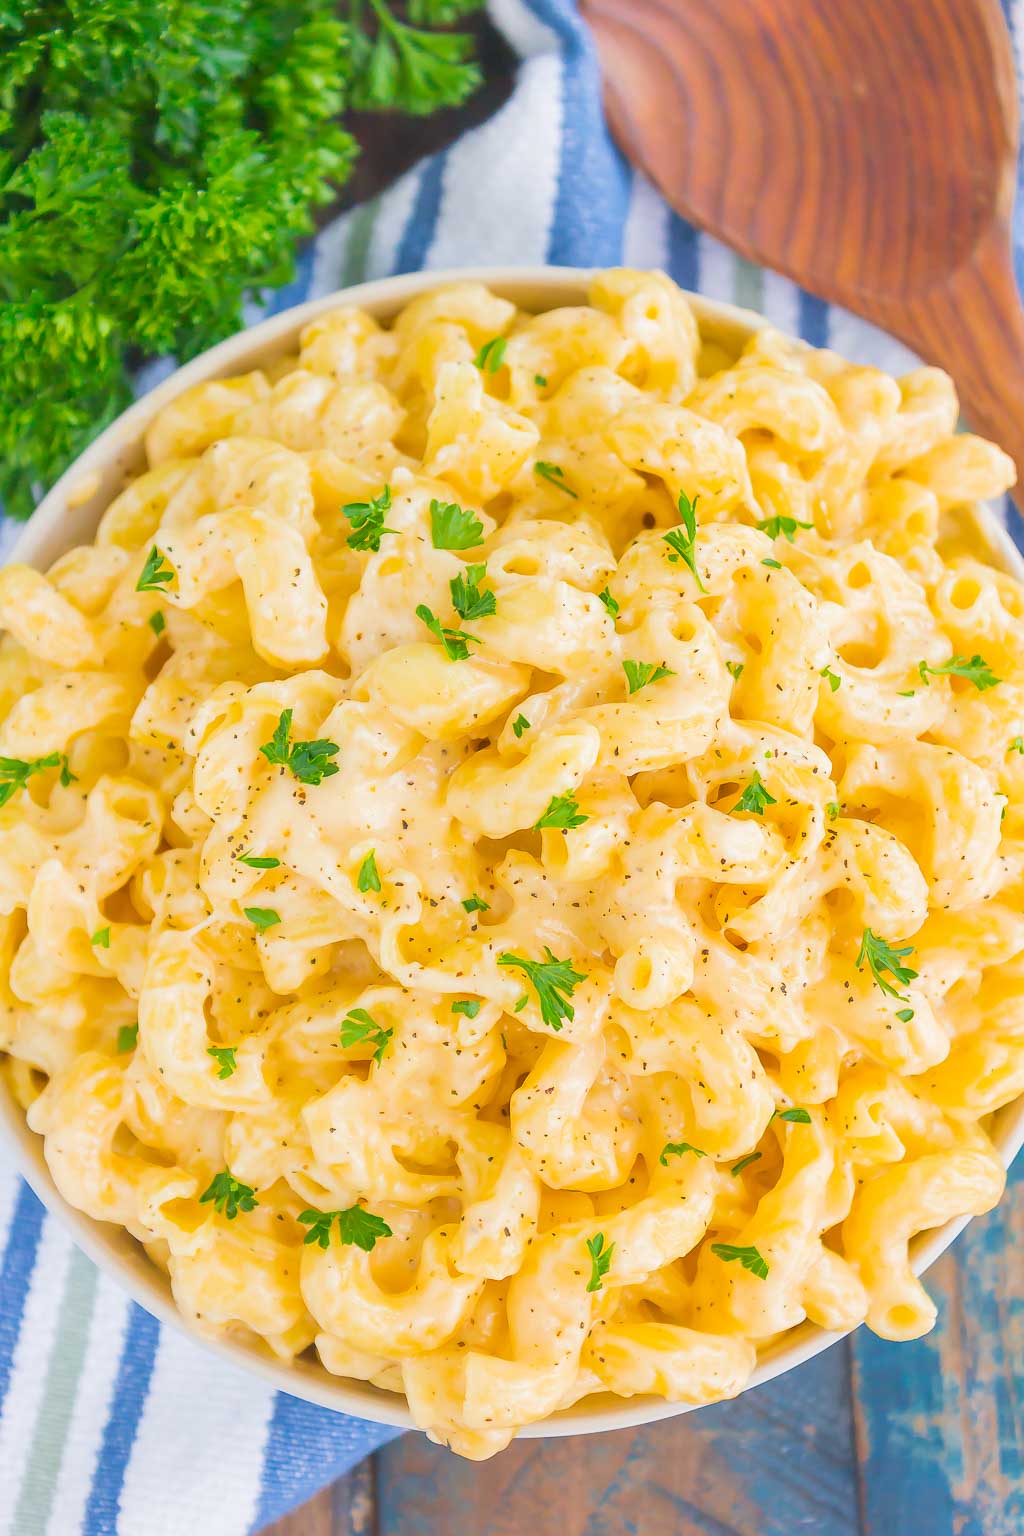 how to make mac and cheese sauce with whipping cream